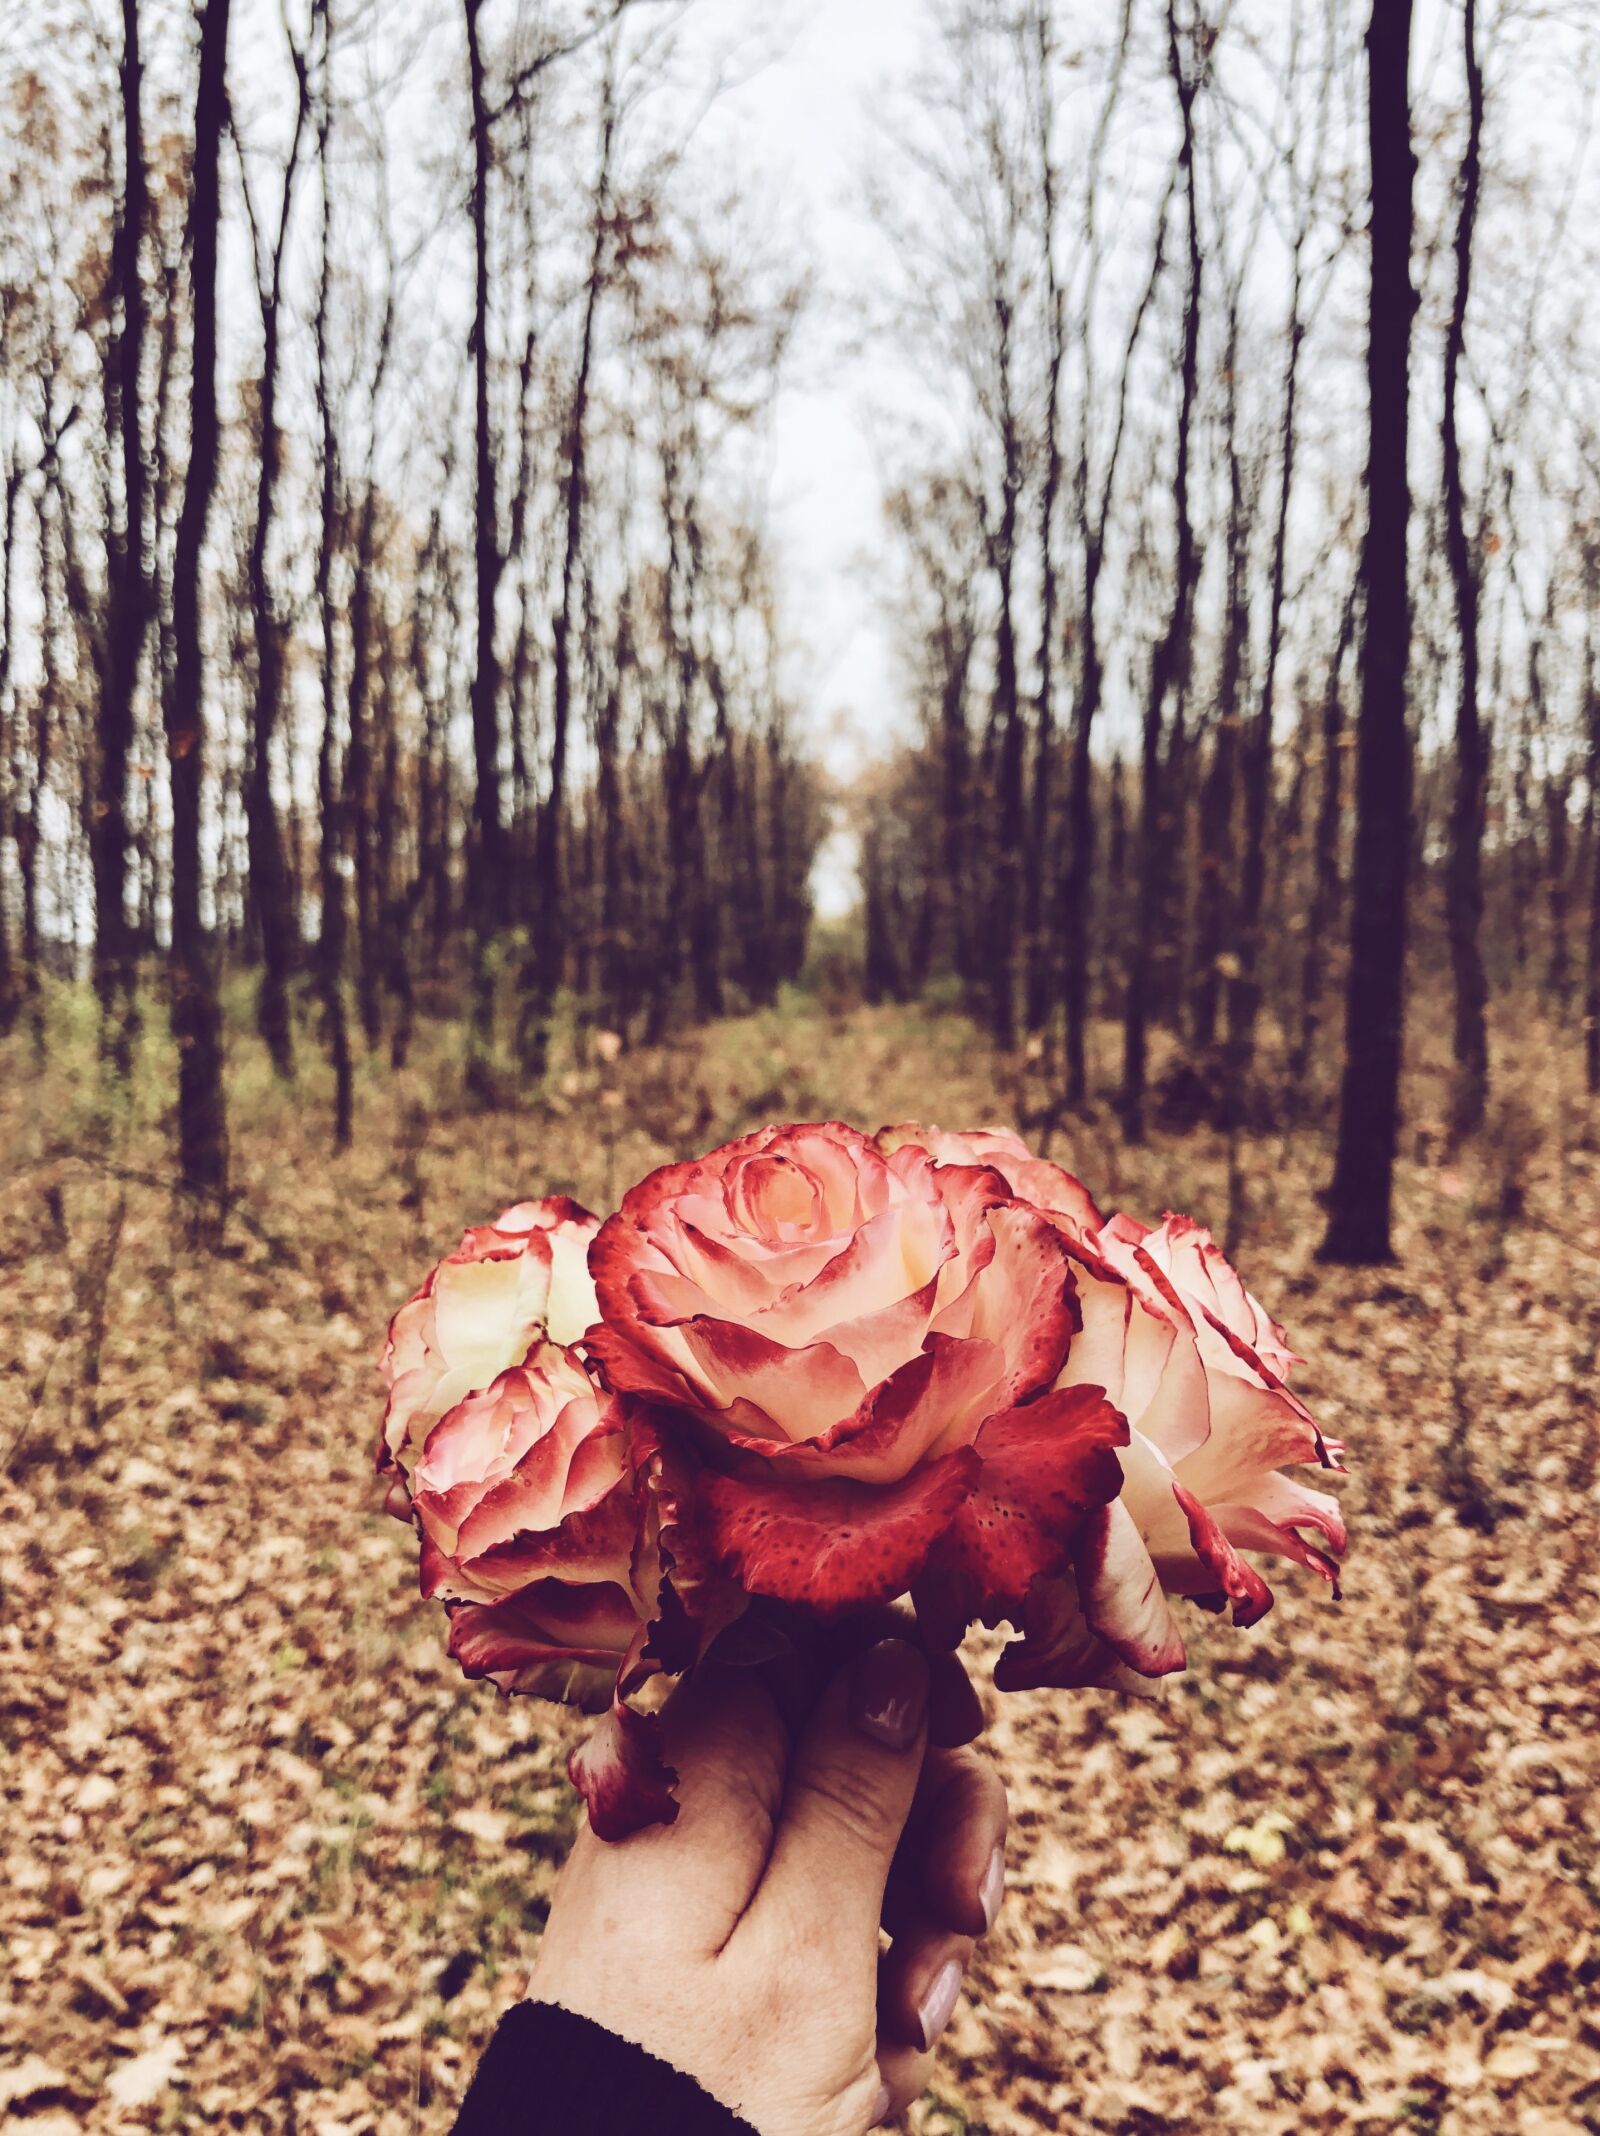 Apple iPhone 8 Plus sample photo. Forest, trees, roses photography